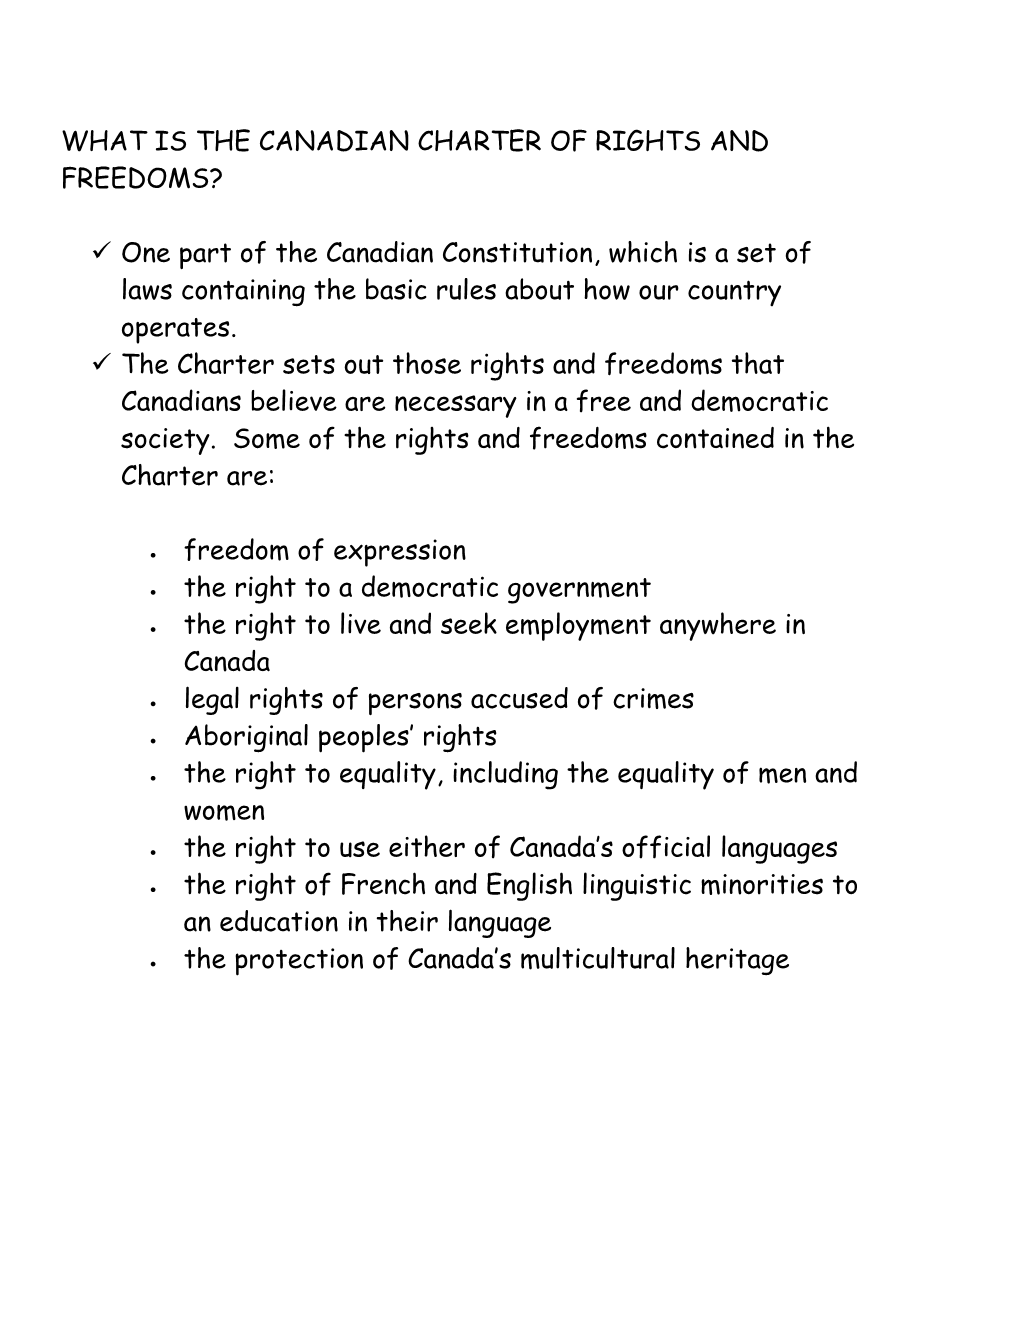 What Is the Canadian Charter of Rights and Freedoms